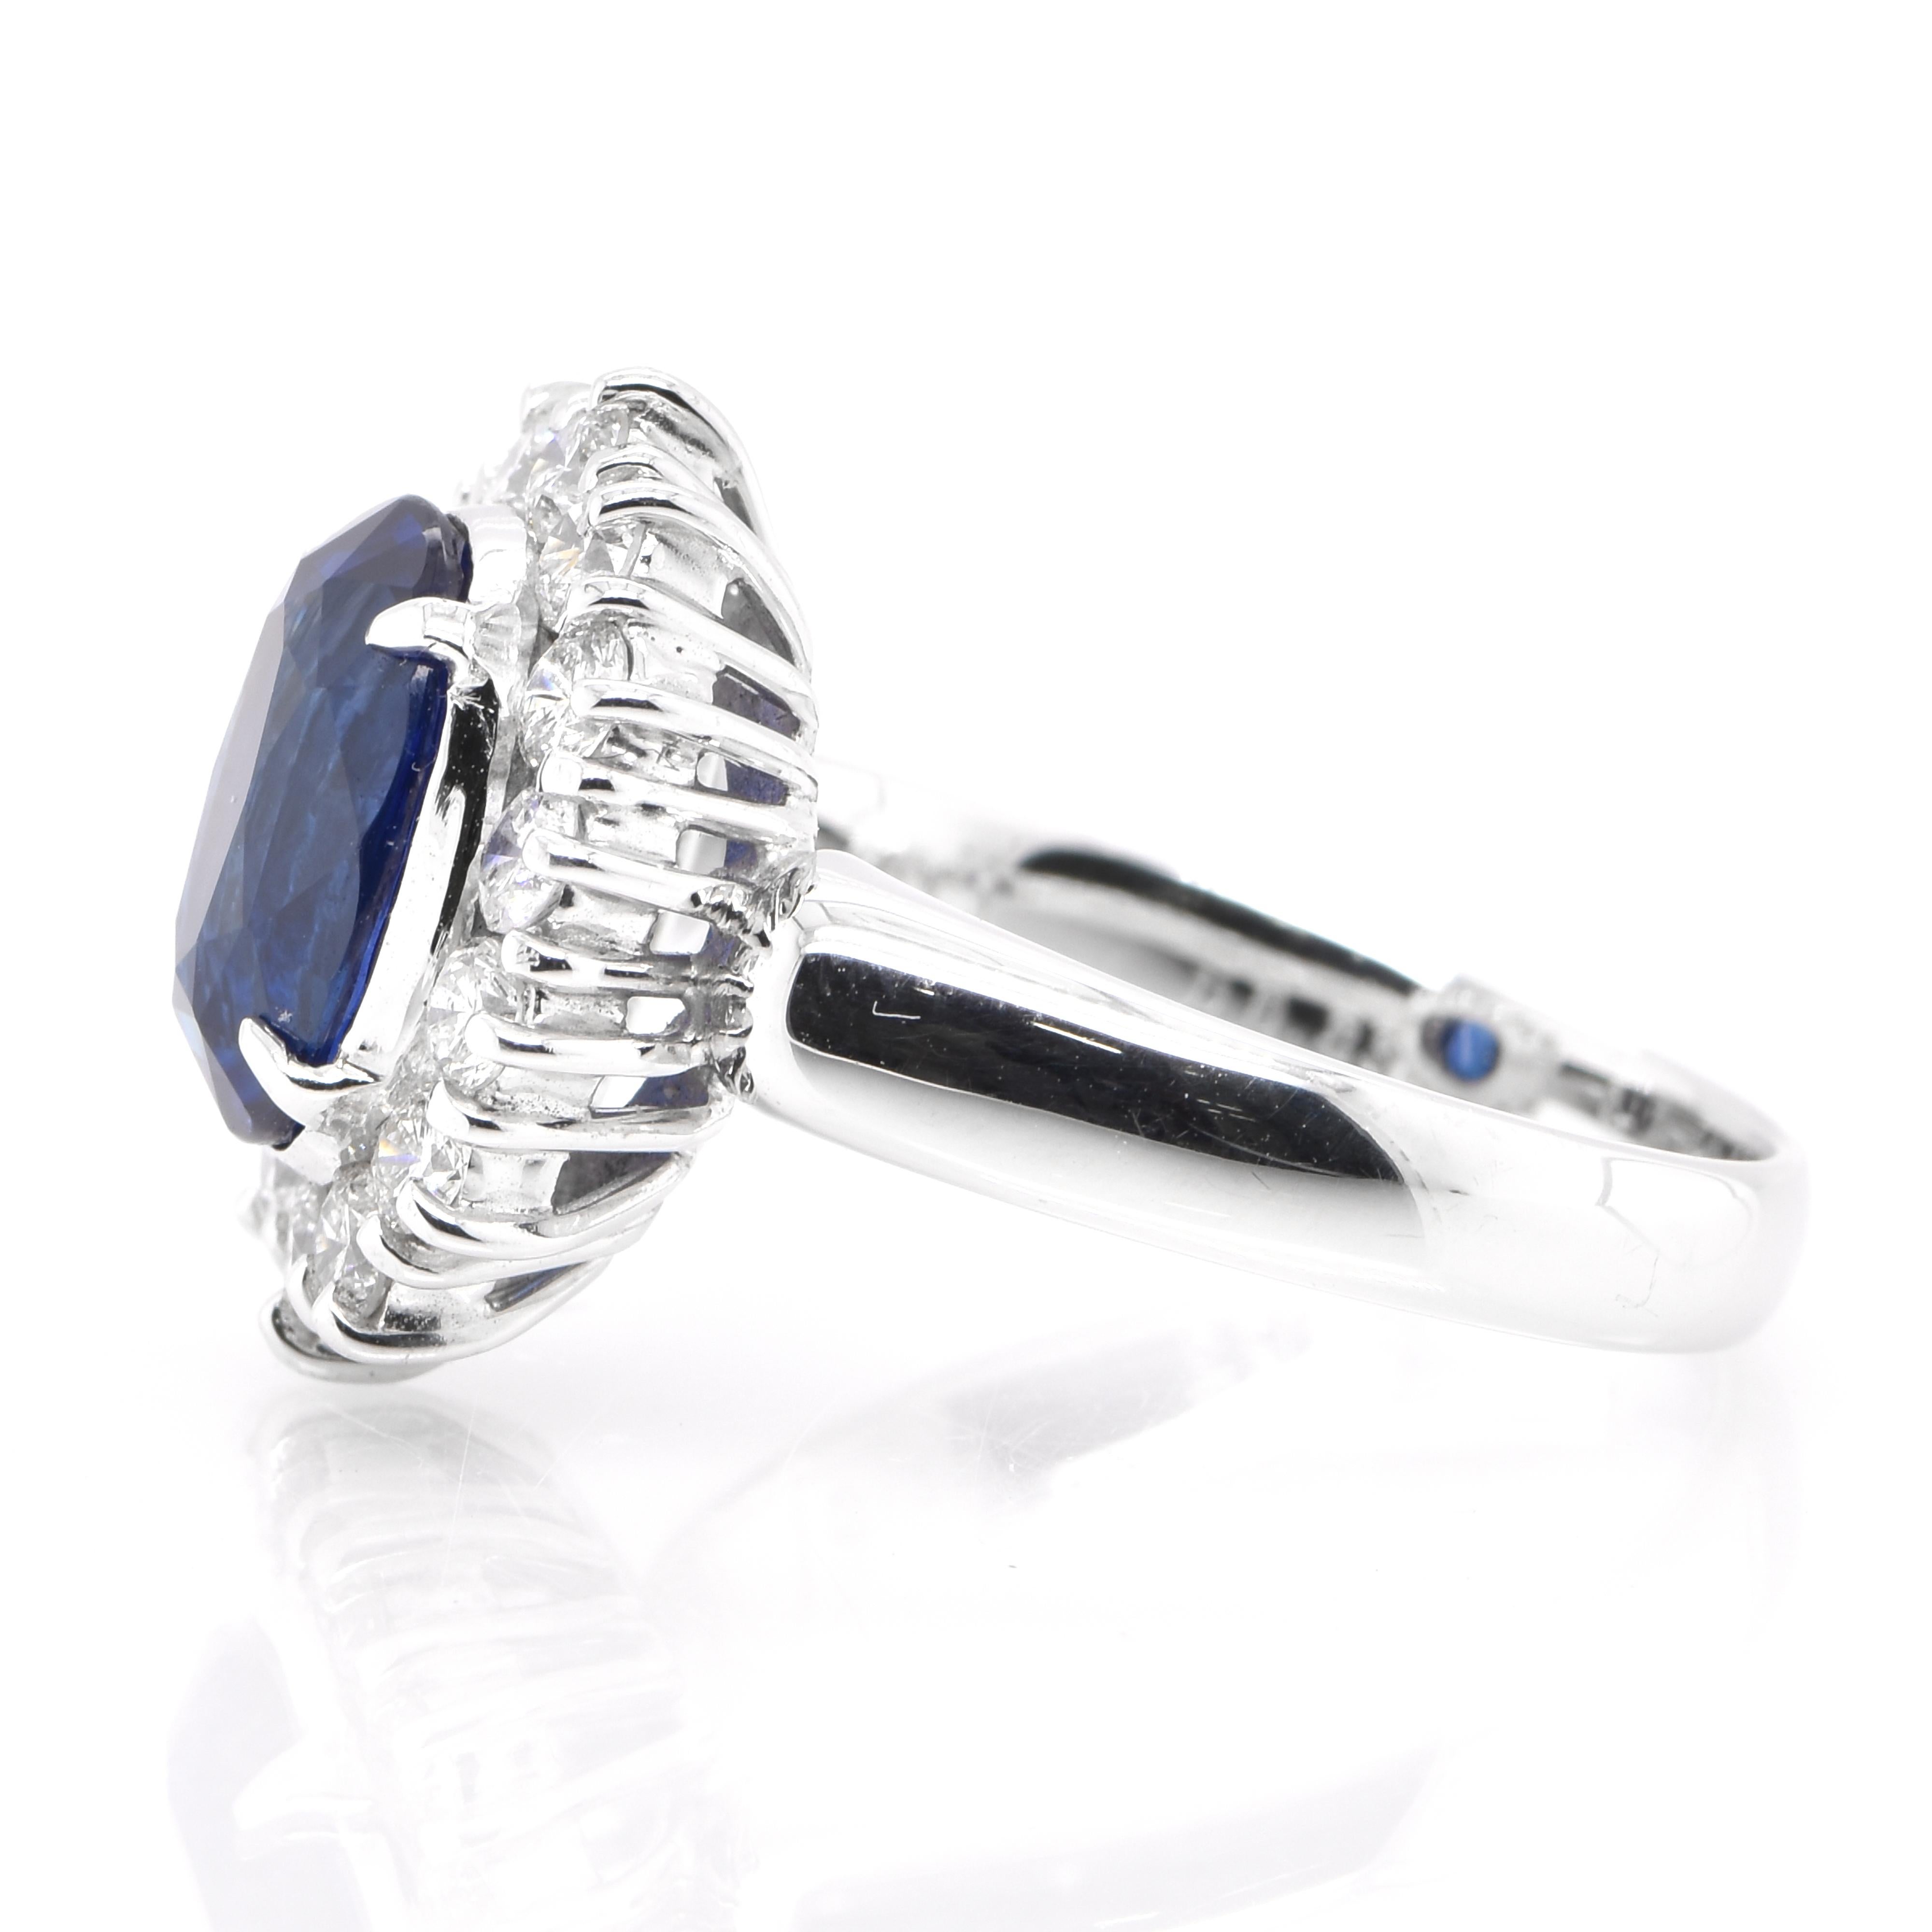 Oval Cut AIG Certified 3.11 Carat Natural Unheated Blue Sapphire Ring Set in Platinum